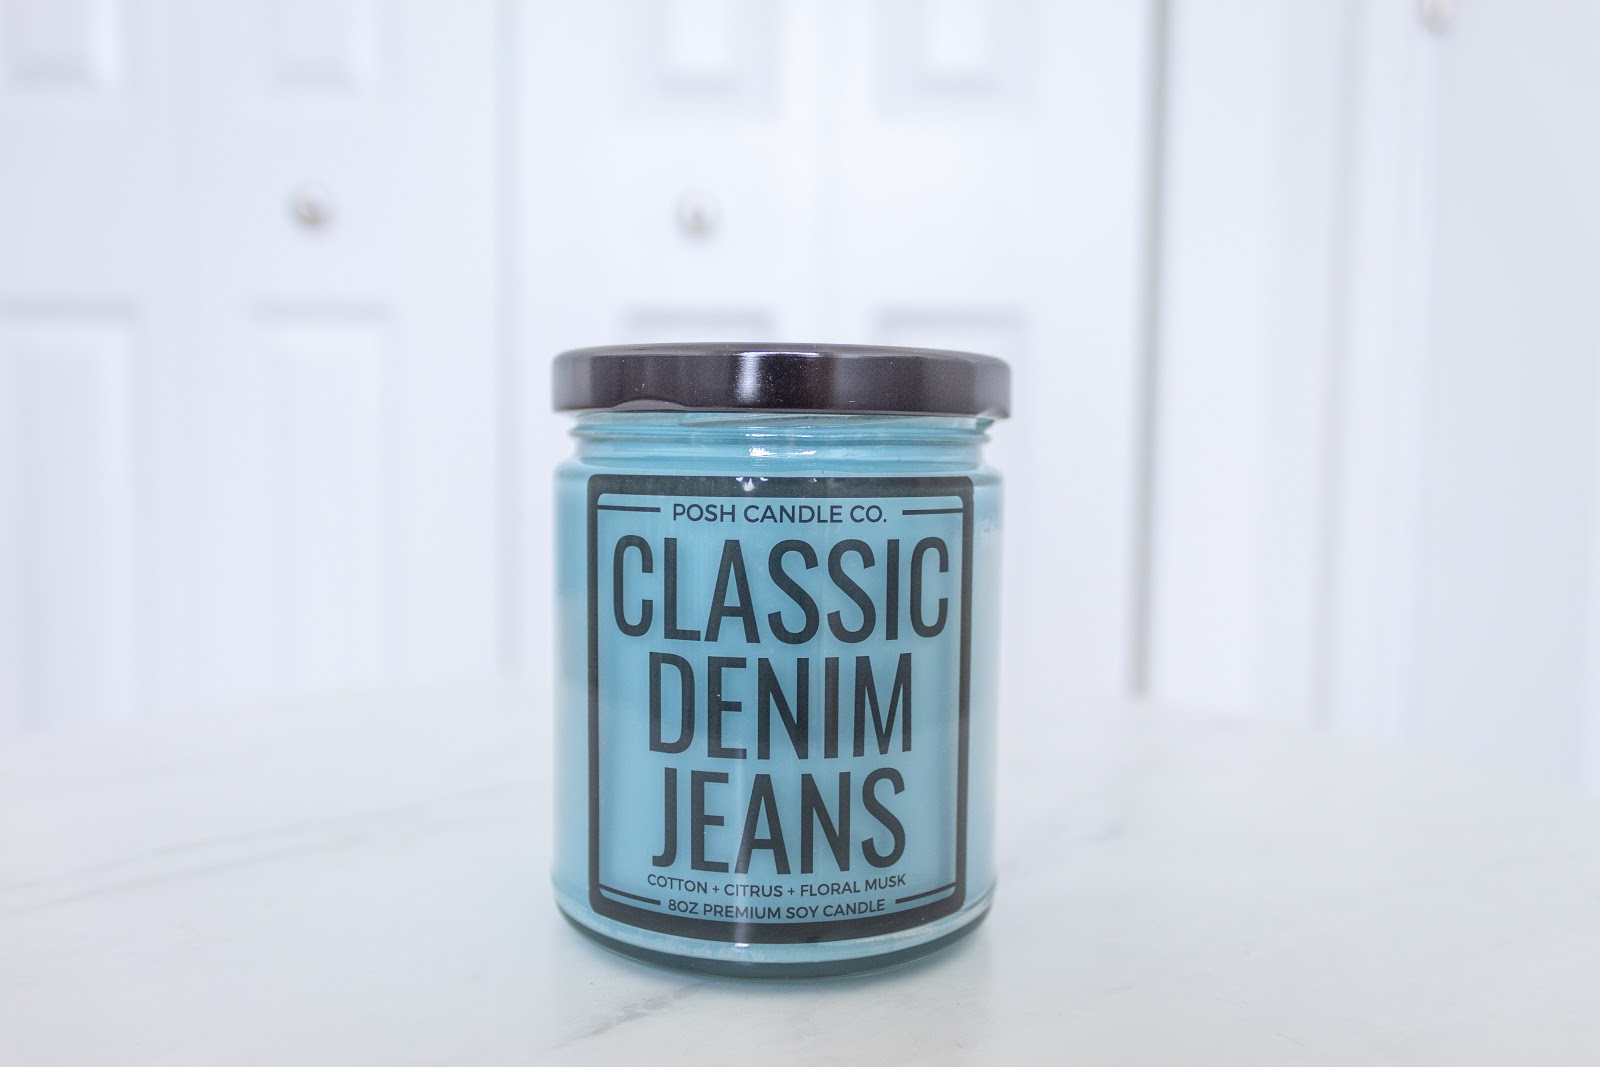 Posh Candle Co. Classic Denim Jeans
Patience & Pearls